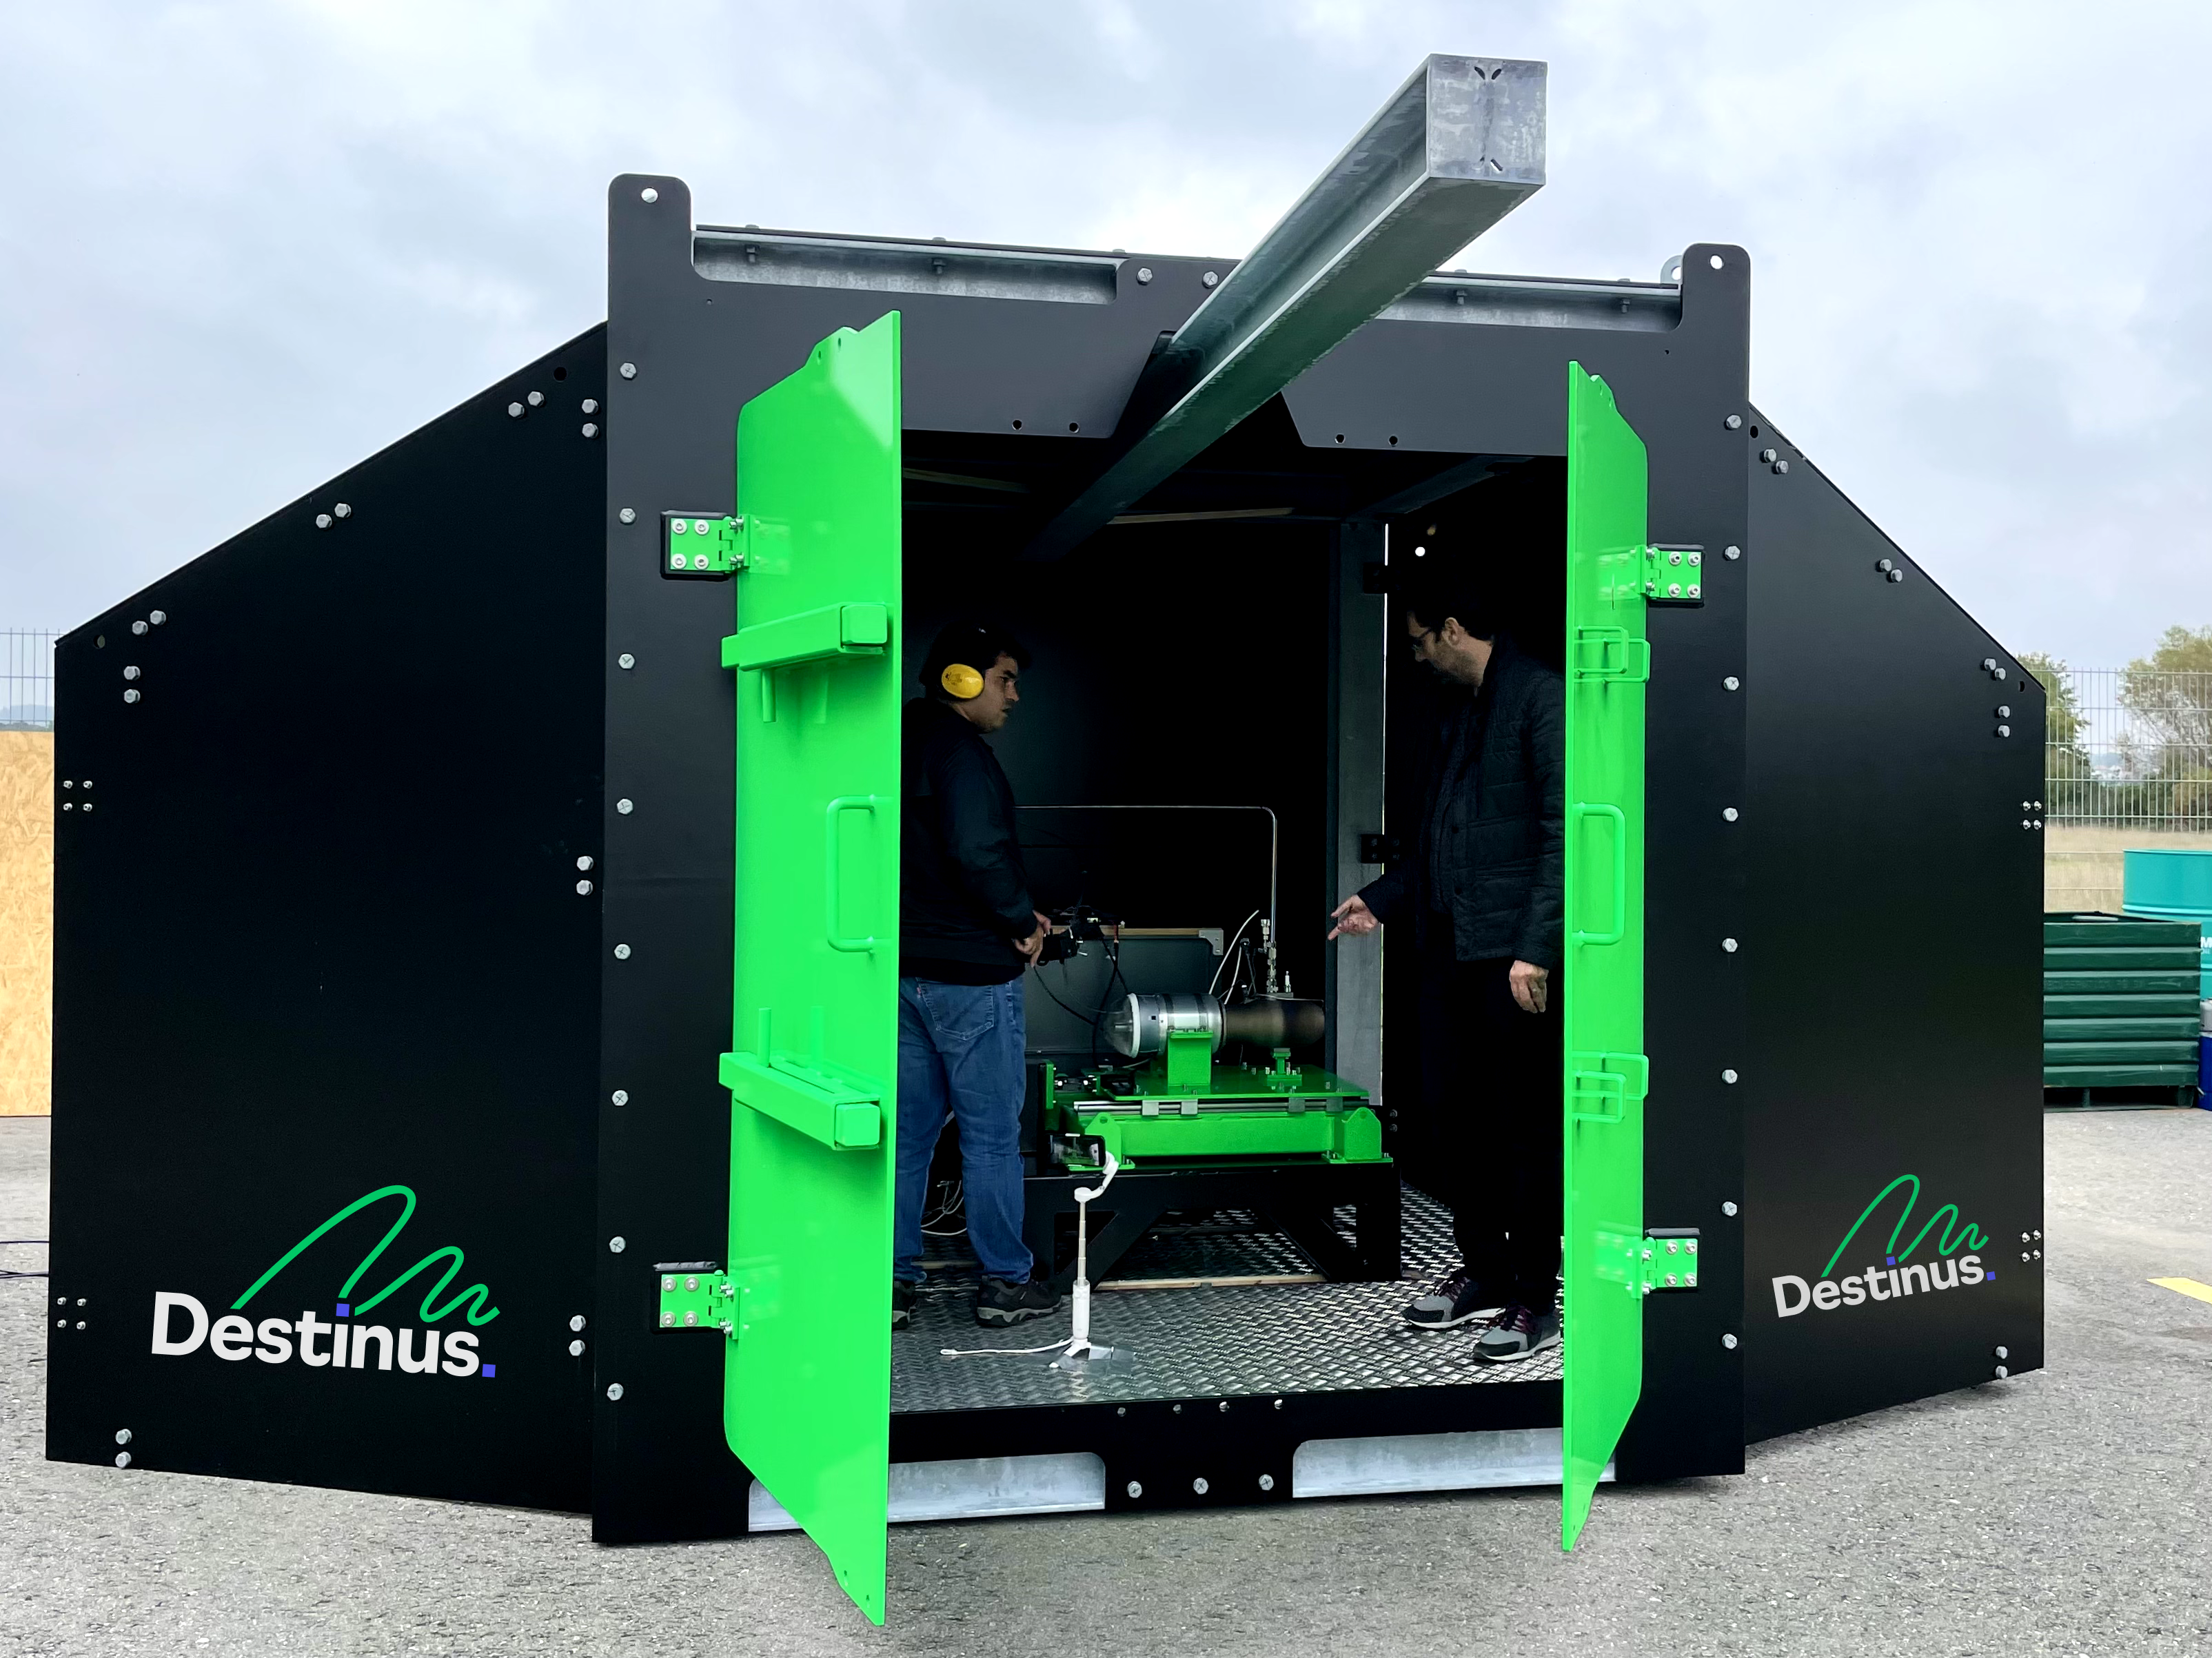 Black and green Destinus hydrogen testing block with employees inside.